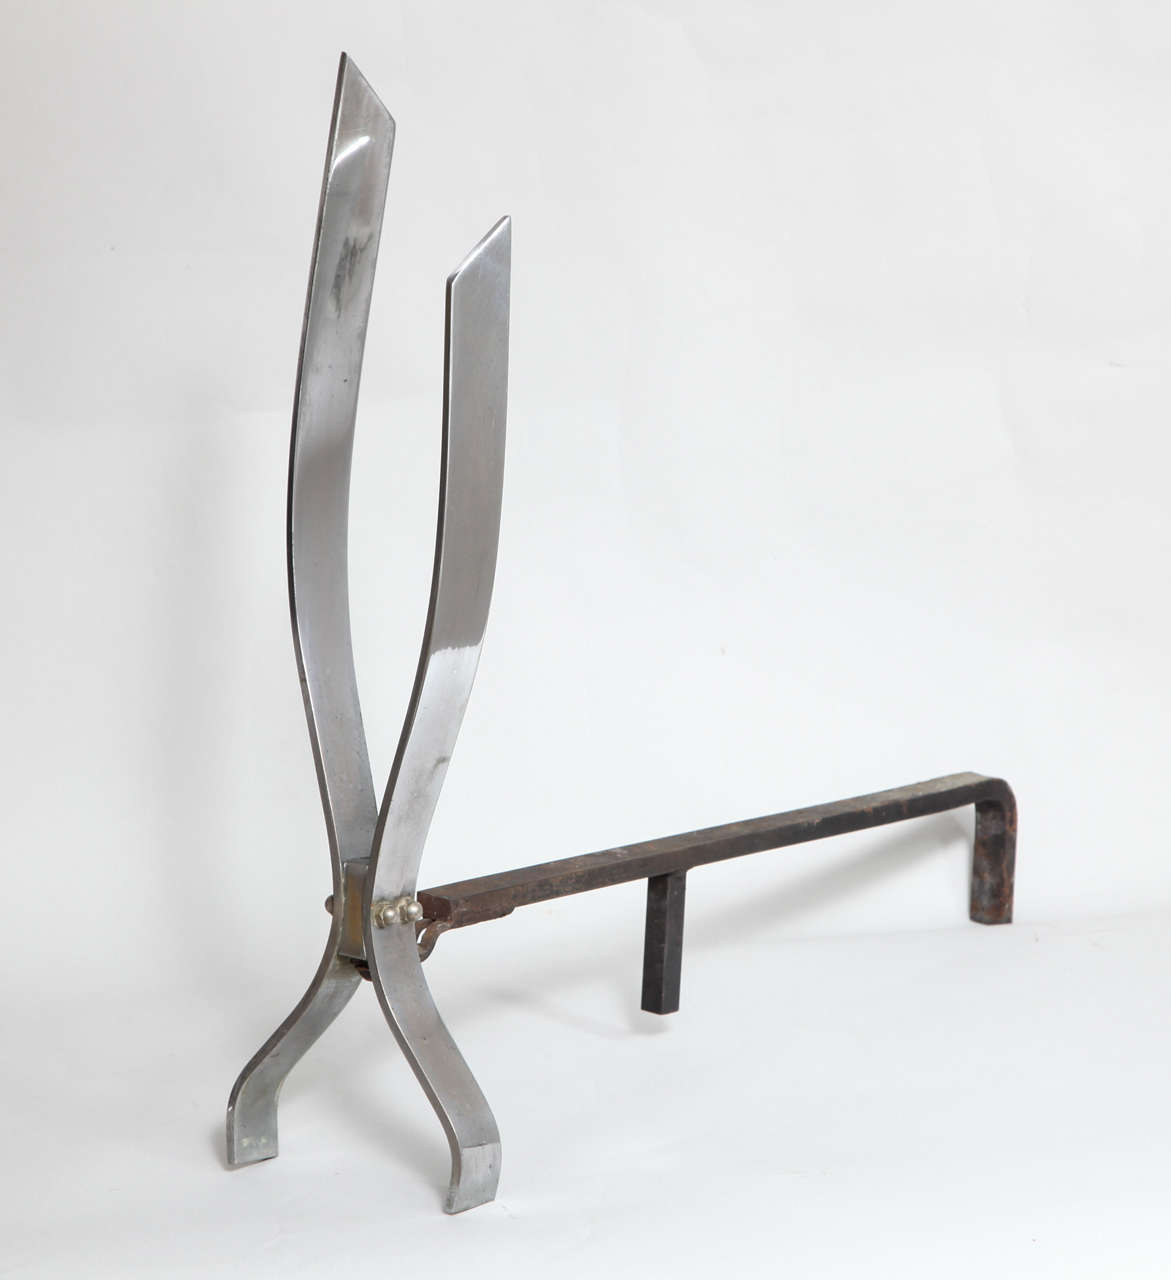 A great pair of Mid-Century Modern andirons attributed to Donald Deskey.